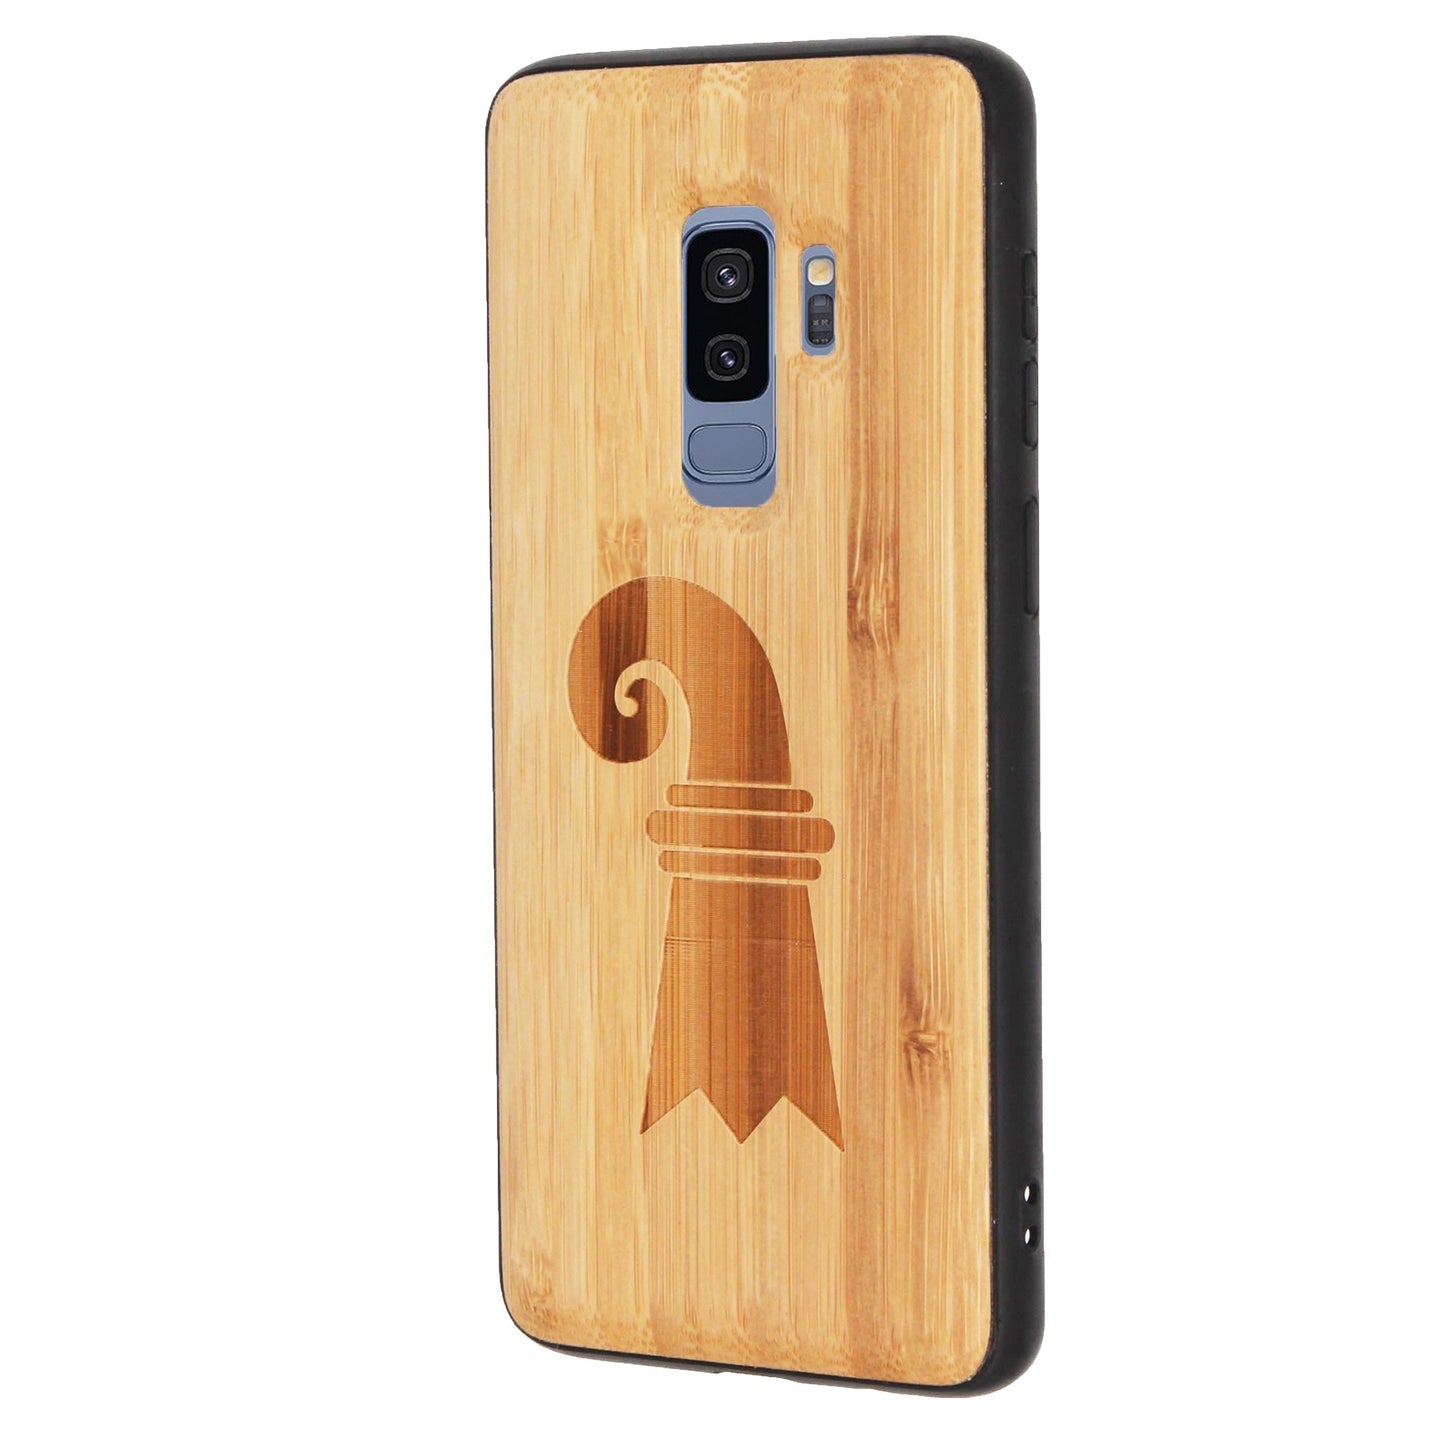 Baslerstab Eden case made of bamboo for Samsung Galaxy S9 Plus